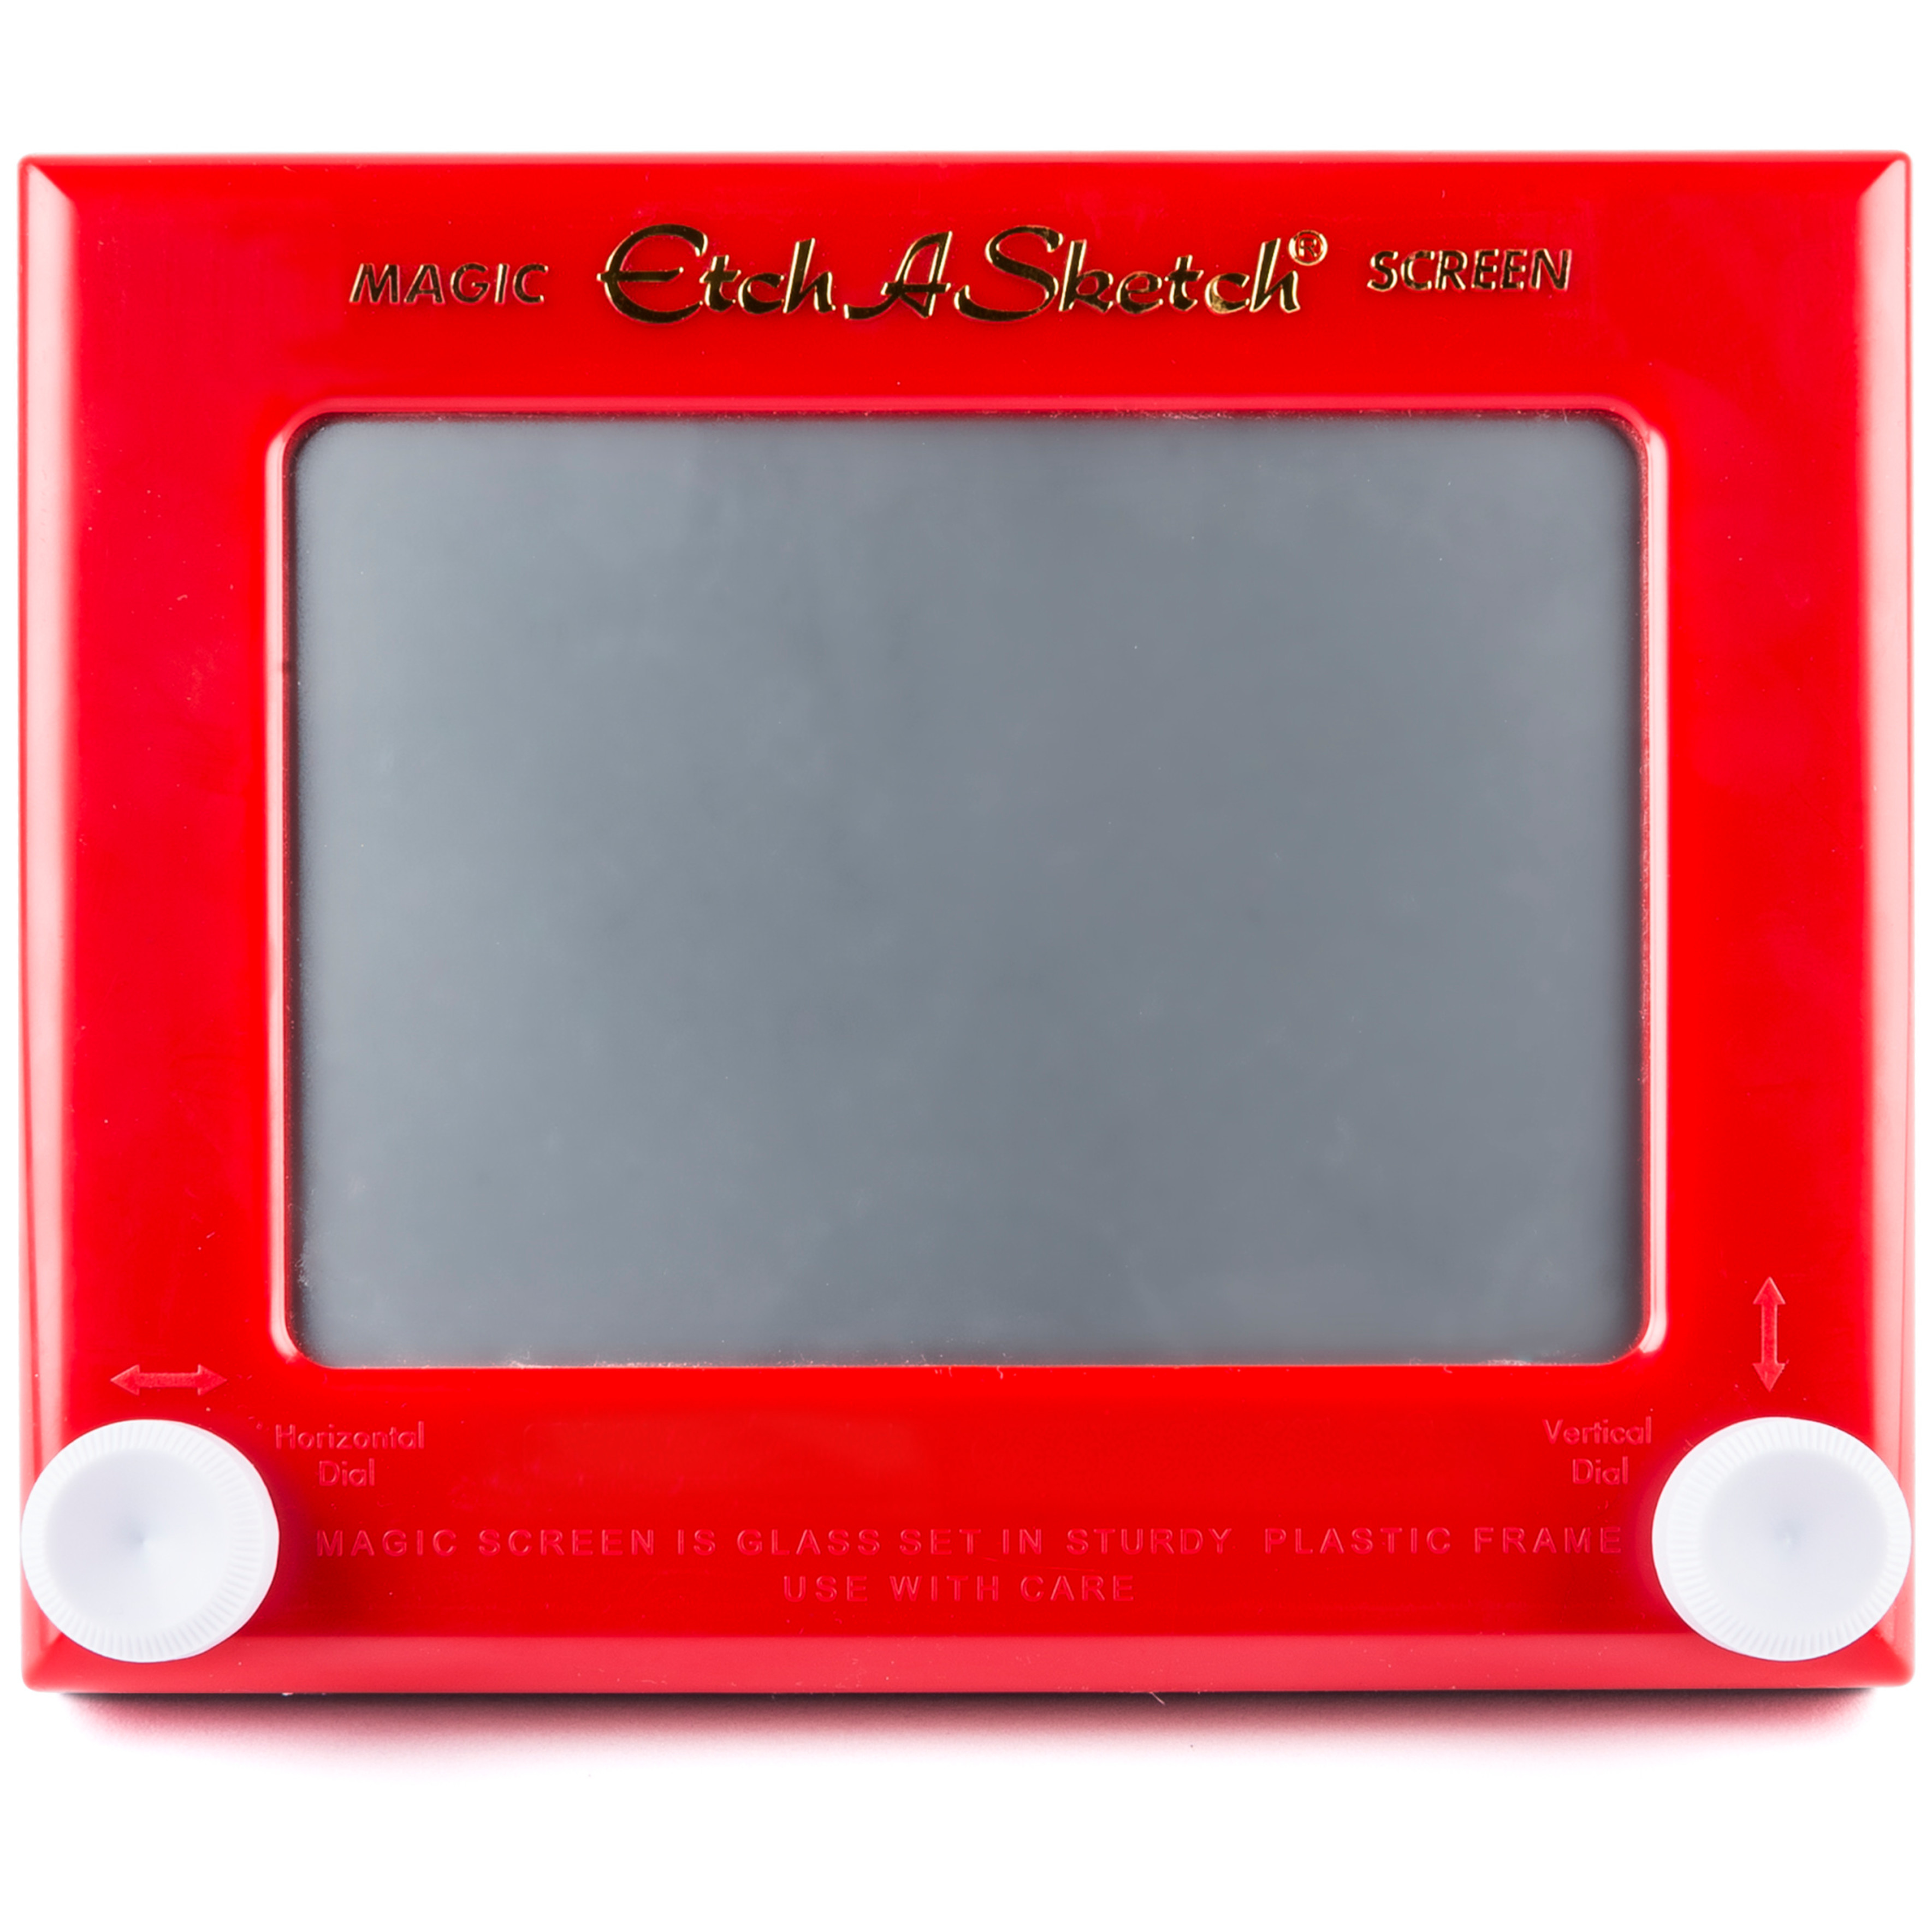 Etch A Sketch, Classic Red Drawing Toy with Magic Screen, for Ages 3 and Up - image 2 of 6